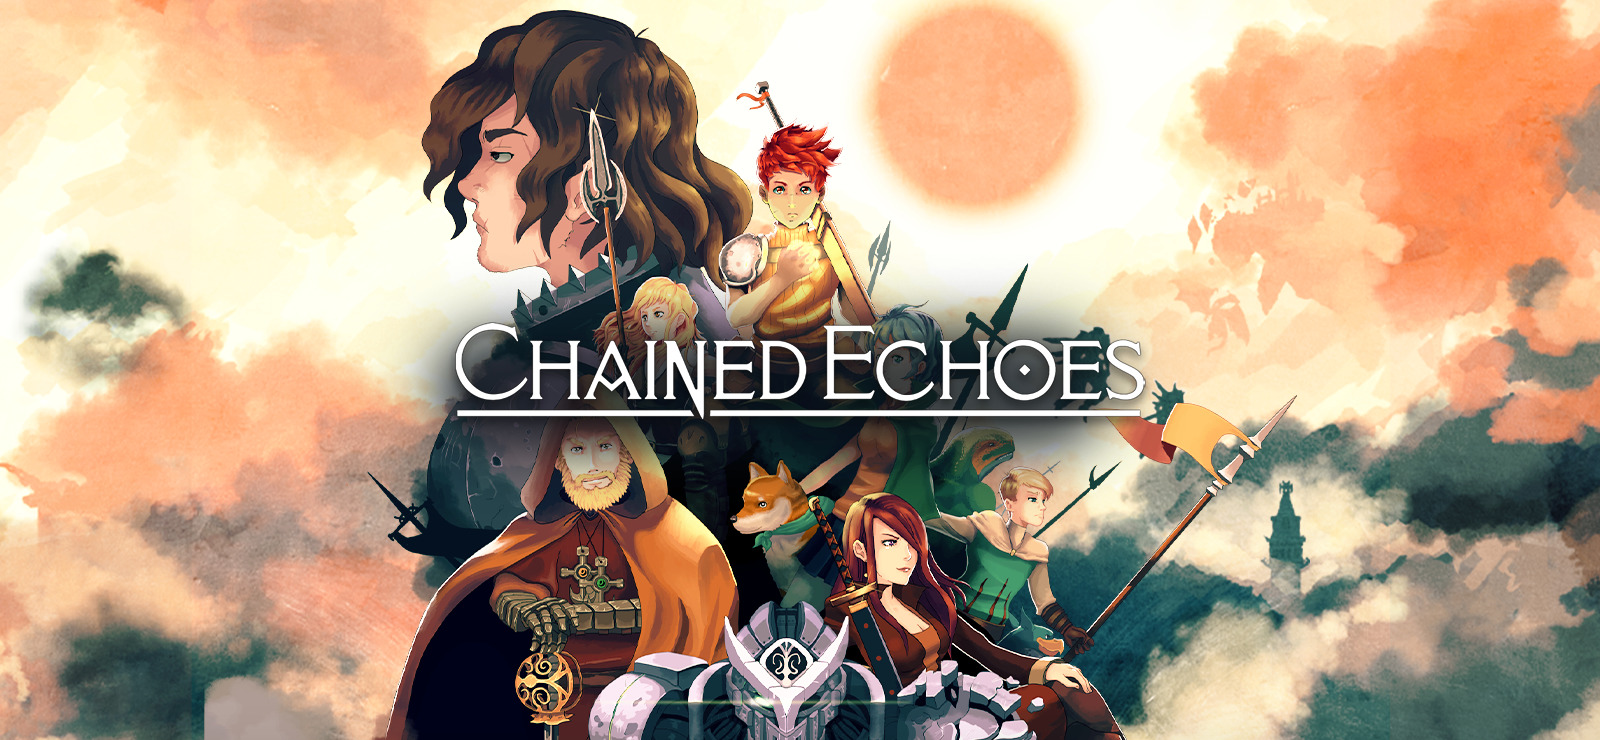 Chained-Echoes-Header.jpg